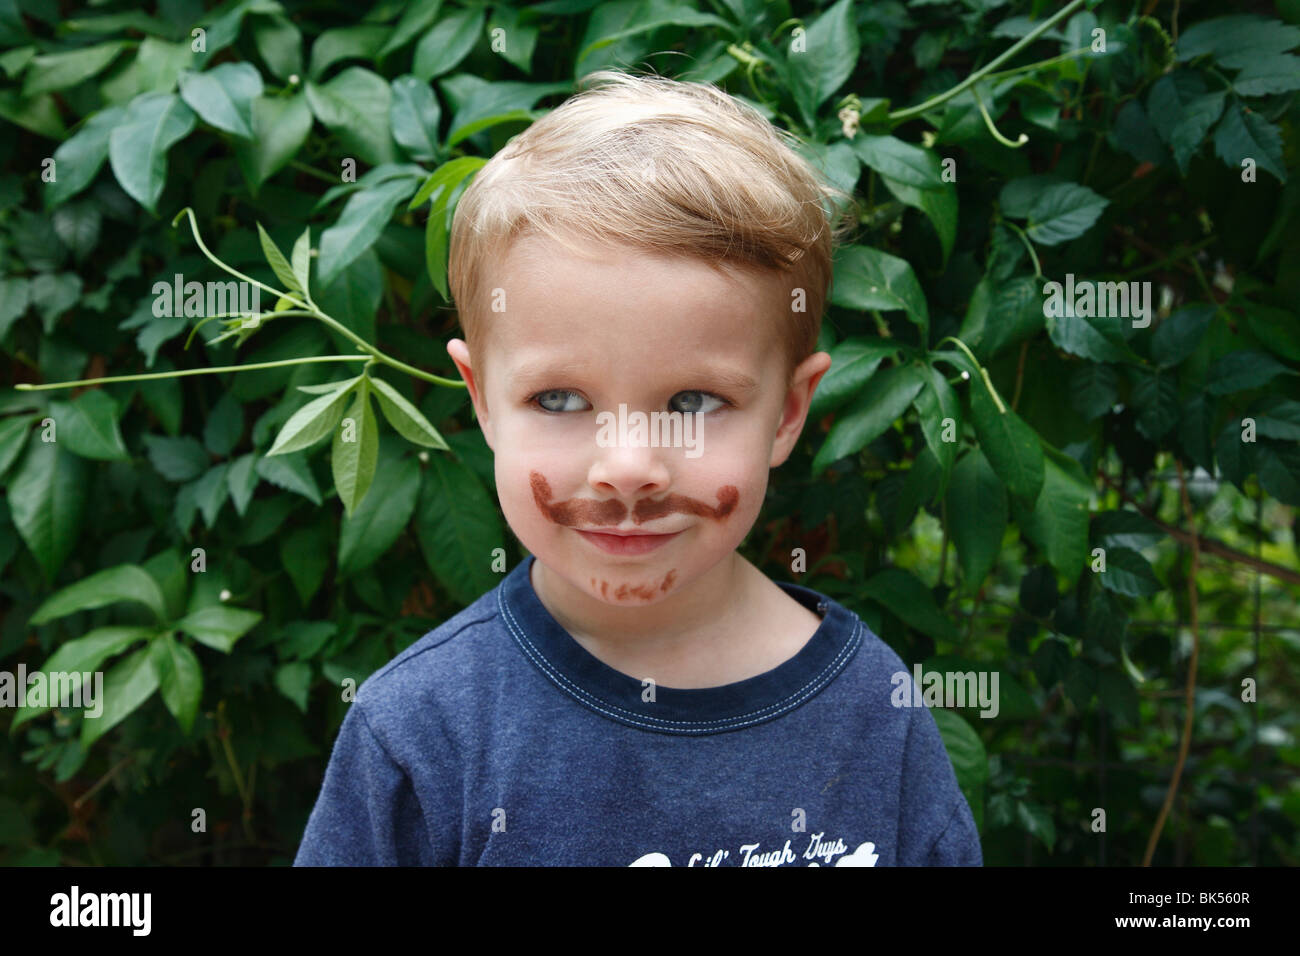 Portrait of Little Boy With Fake Moustache Stock Photo